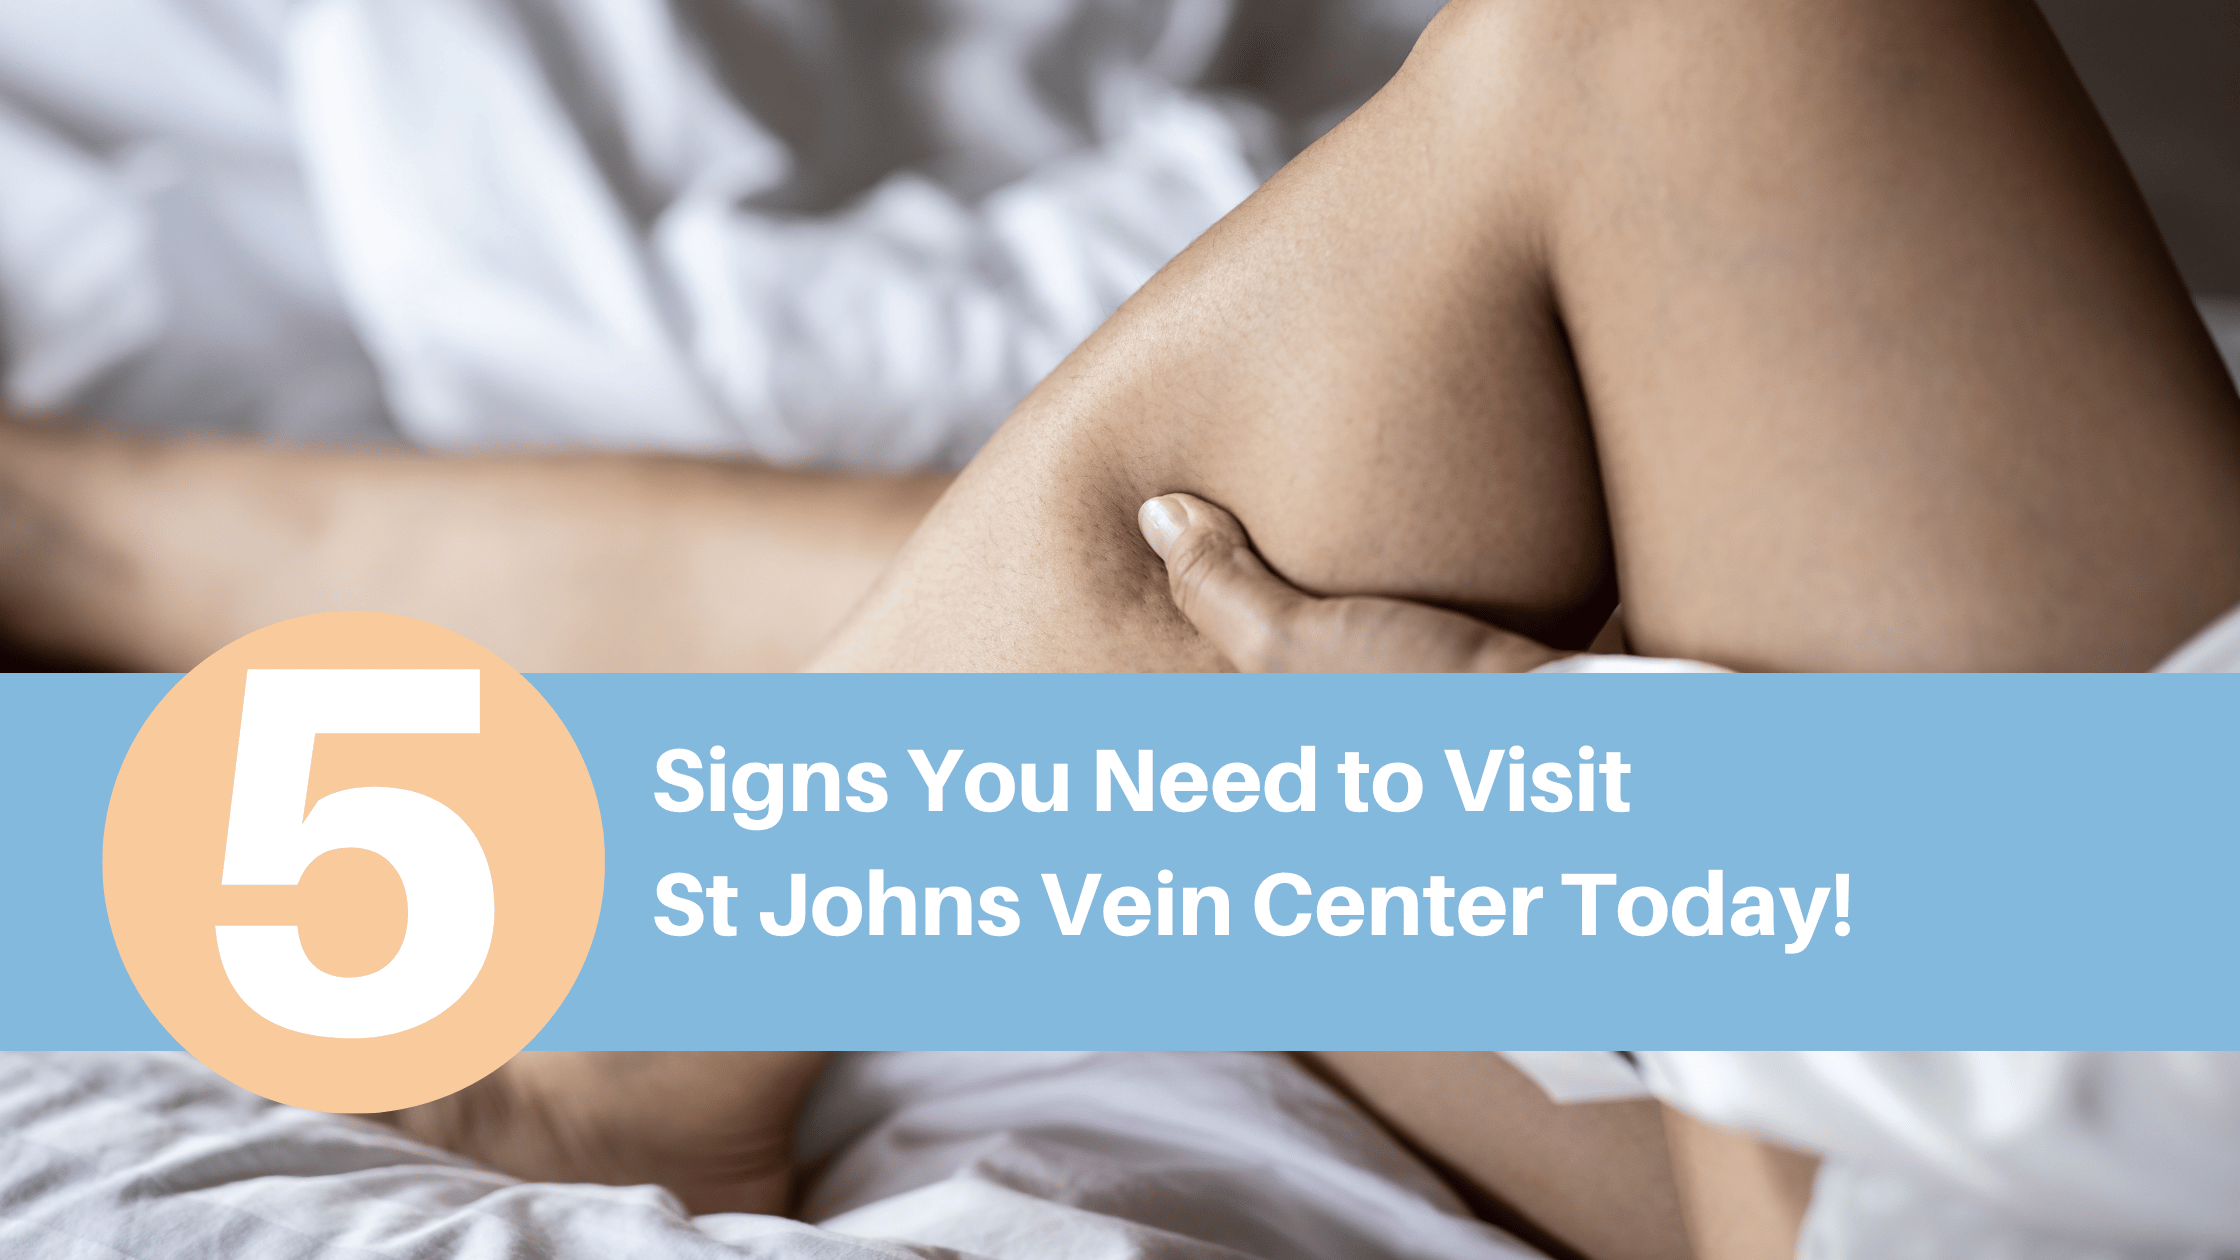 5 Signs You Need to Visit St Johns Vein Center Today!